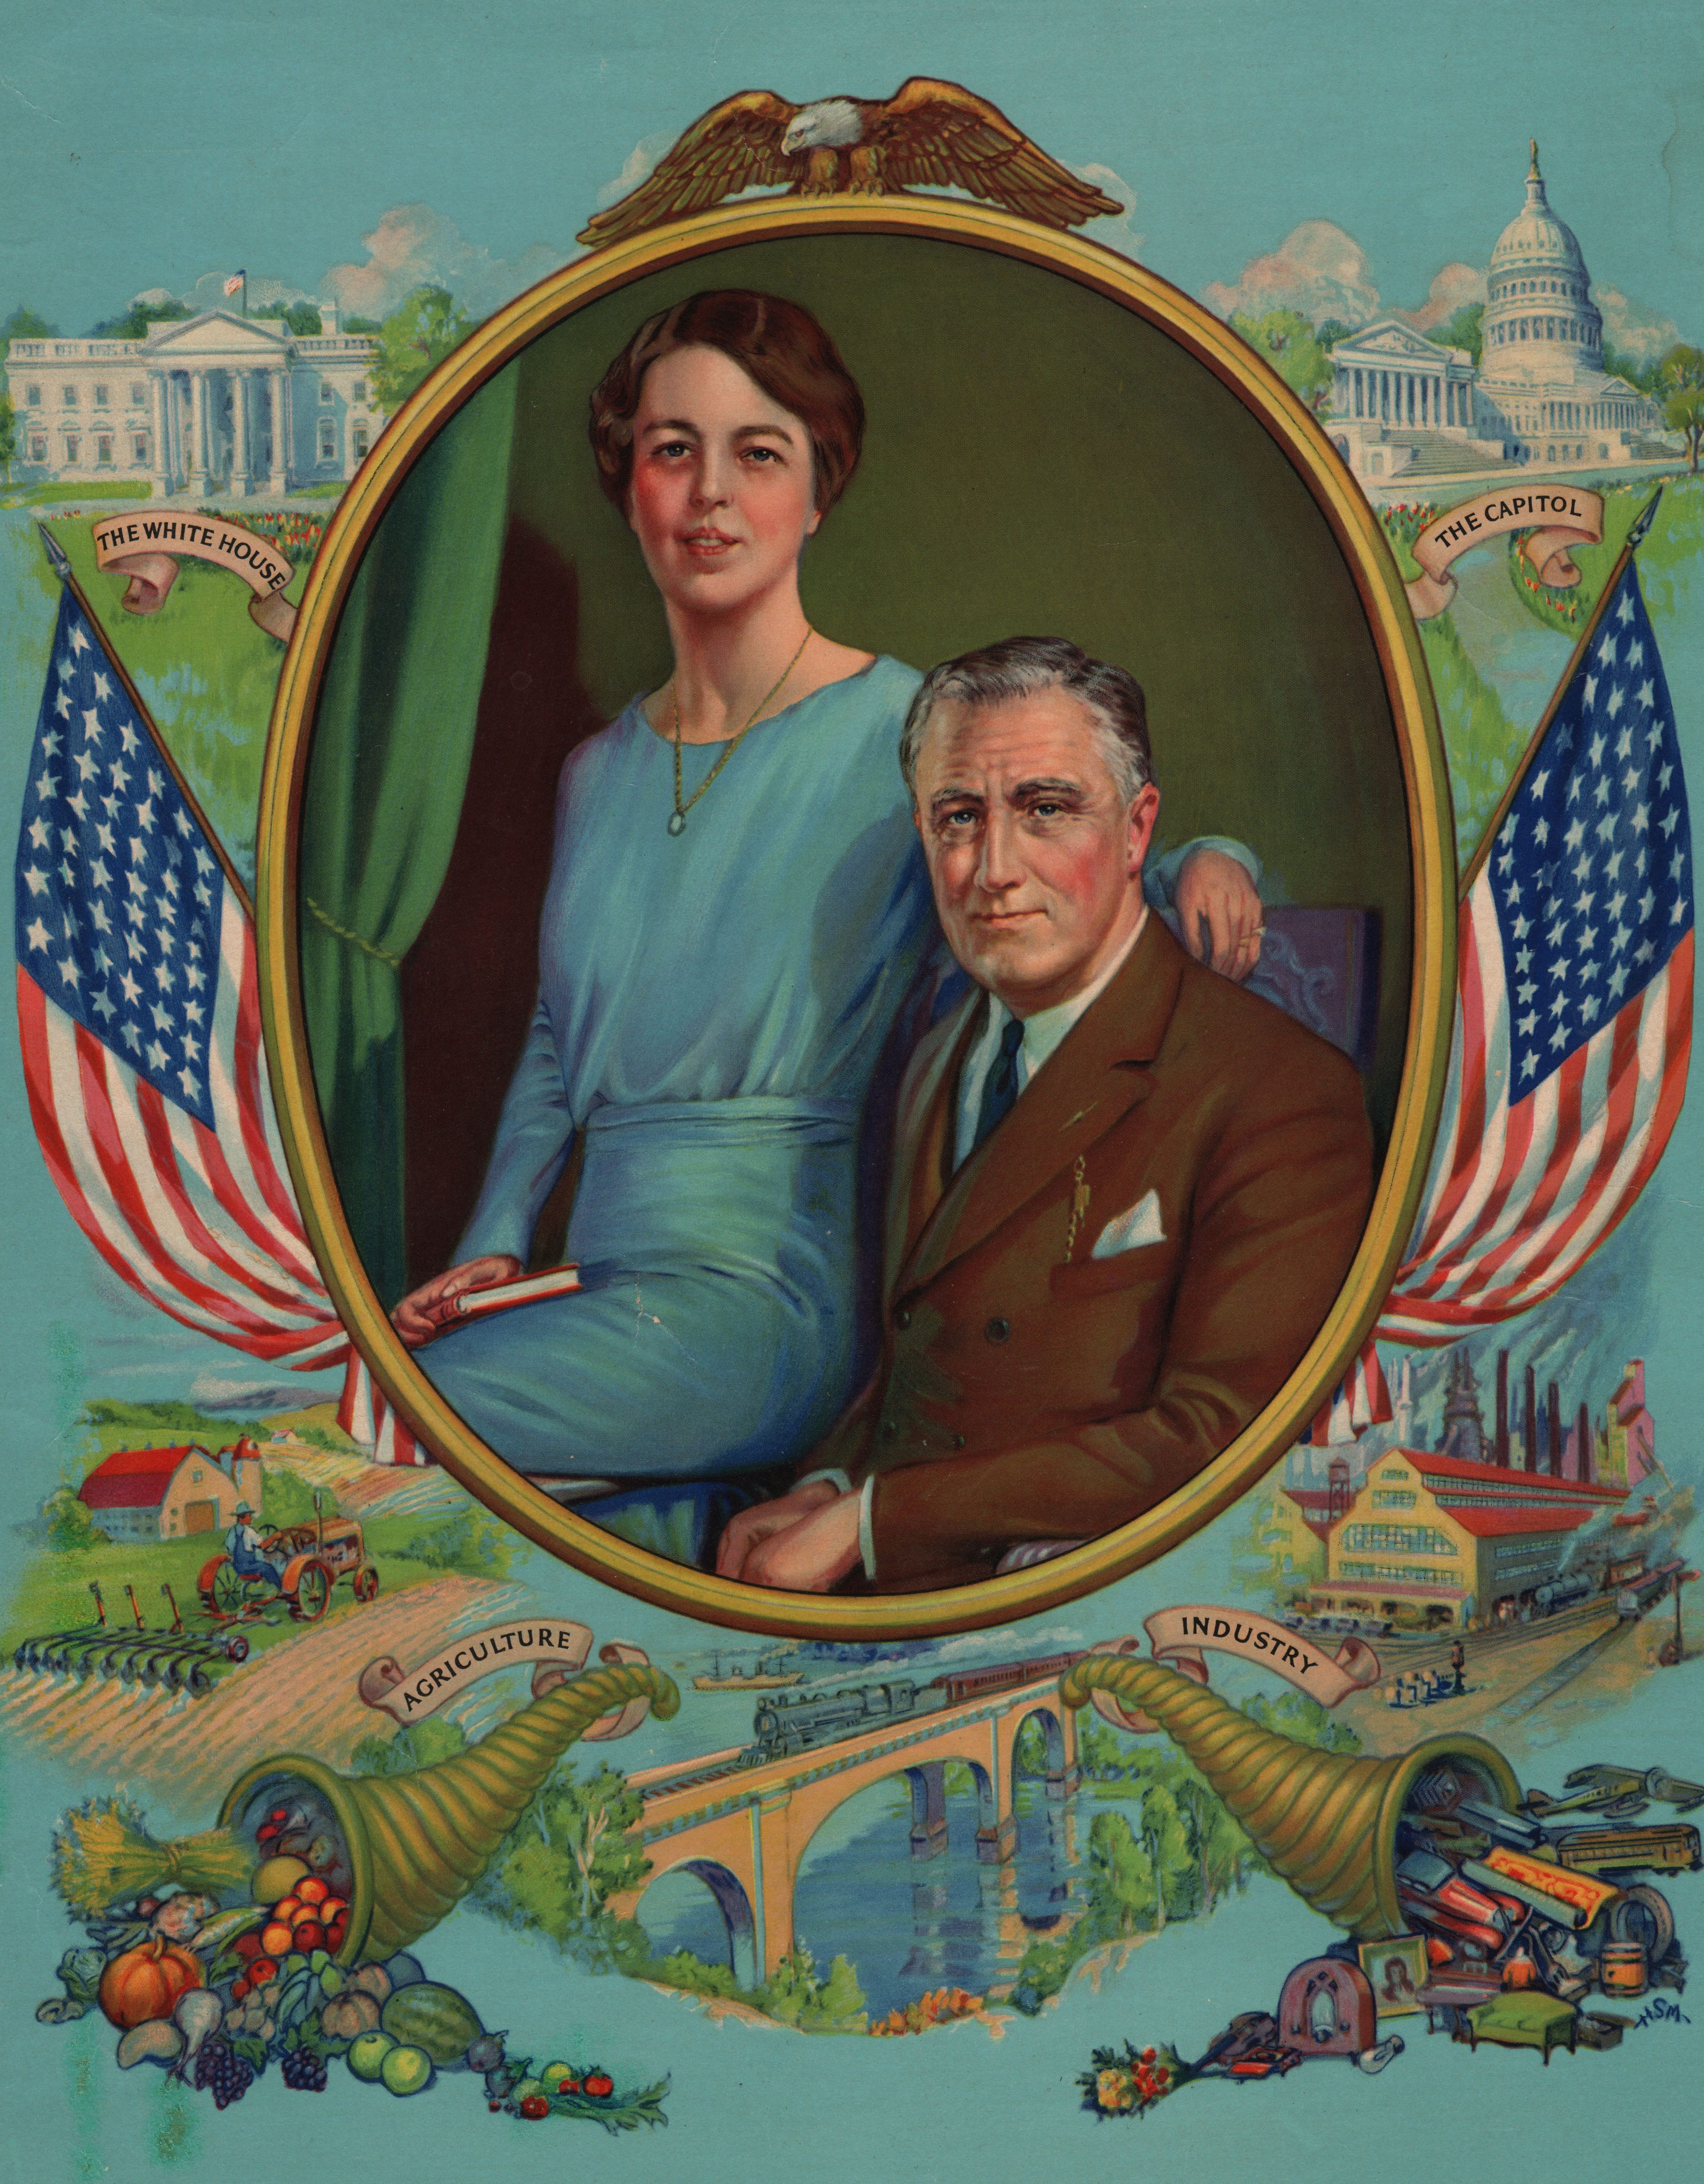 A circa-1930s illustrated portrait of U.S. President Franklin D. Roosevelt and First Lady Eleanor Roosevelt, surrounded by vignettes that suggest national prosperity. (Transcendental Graphics—Getty Images)